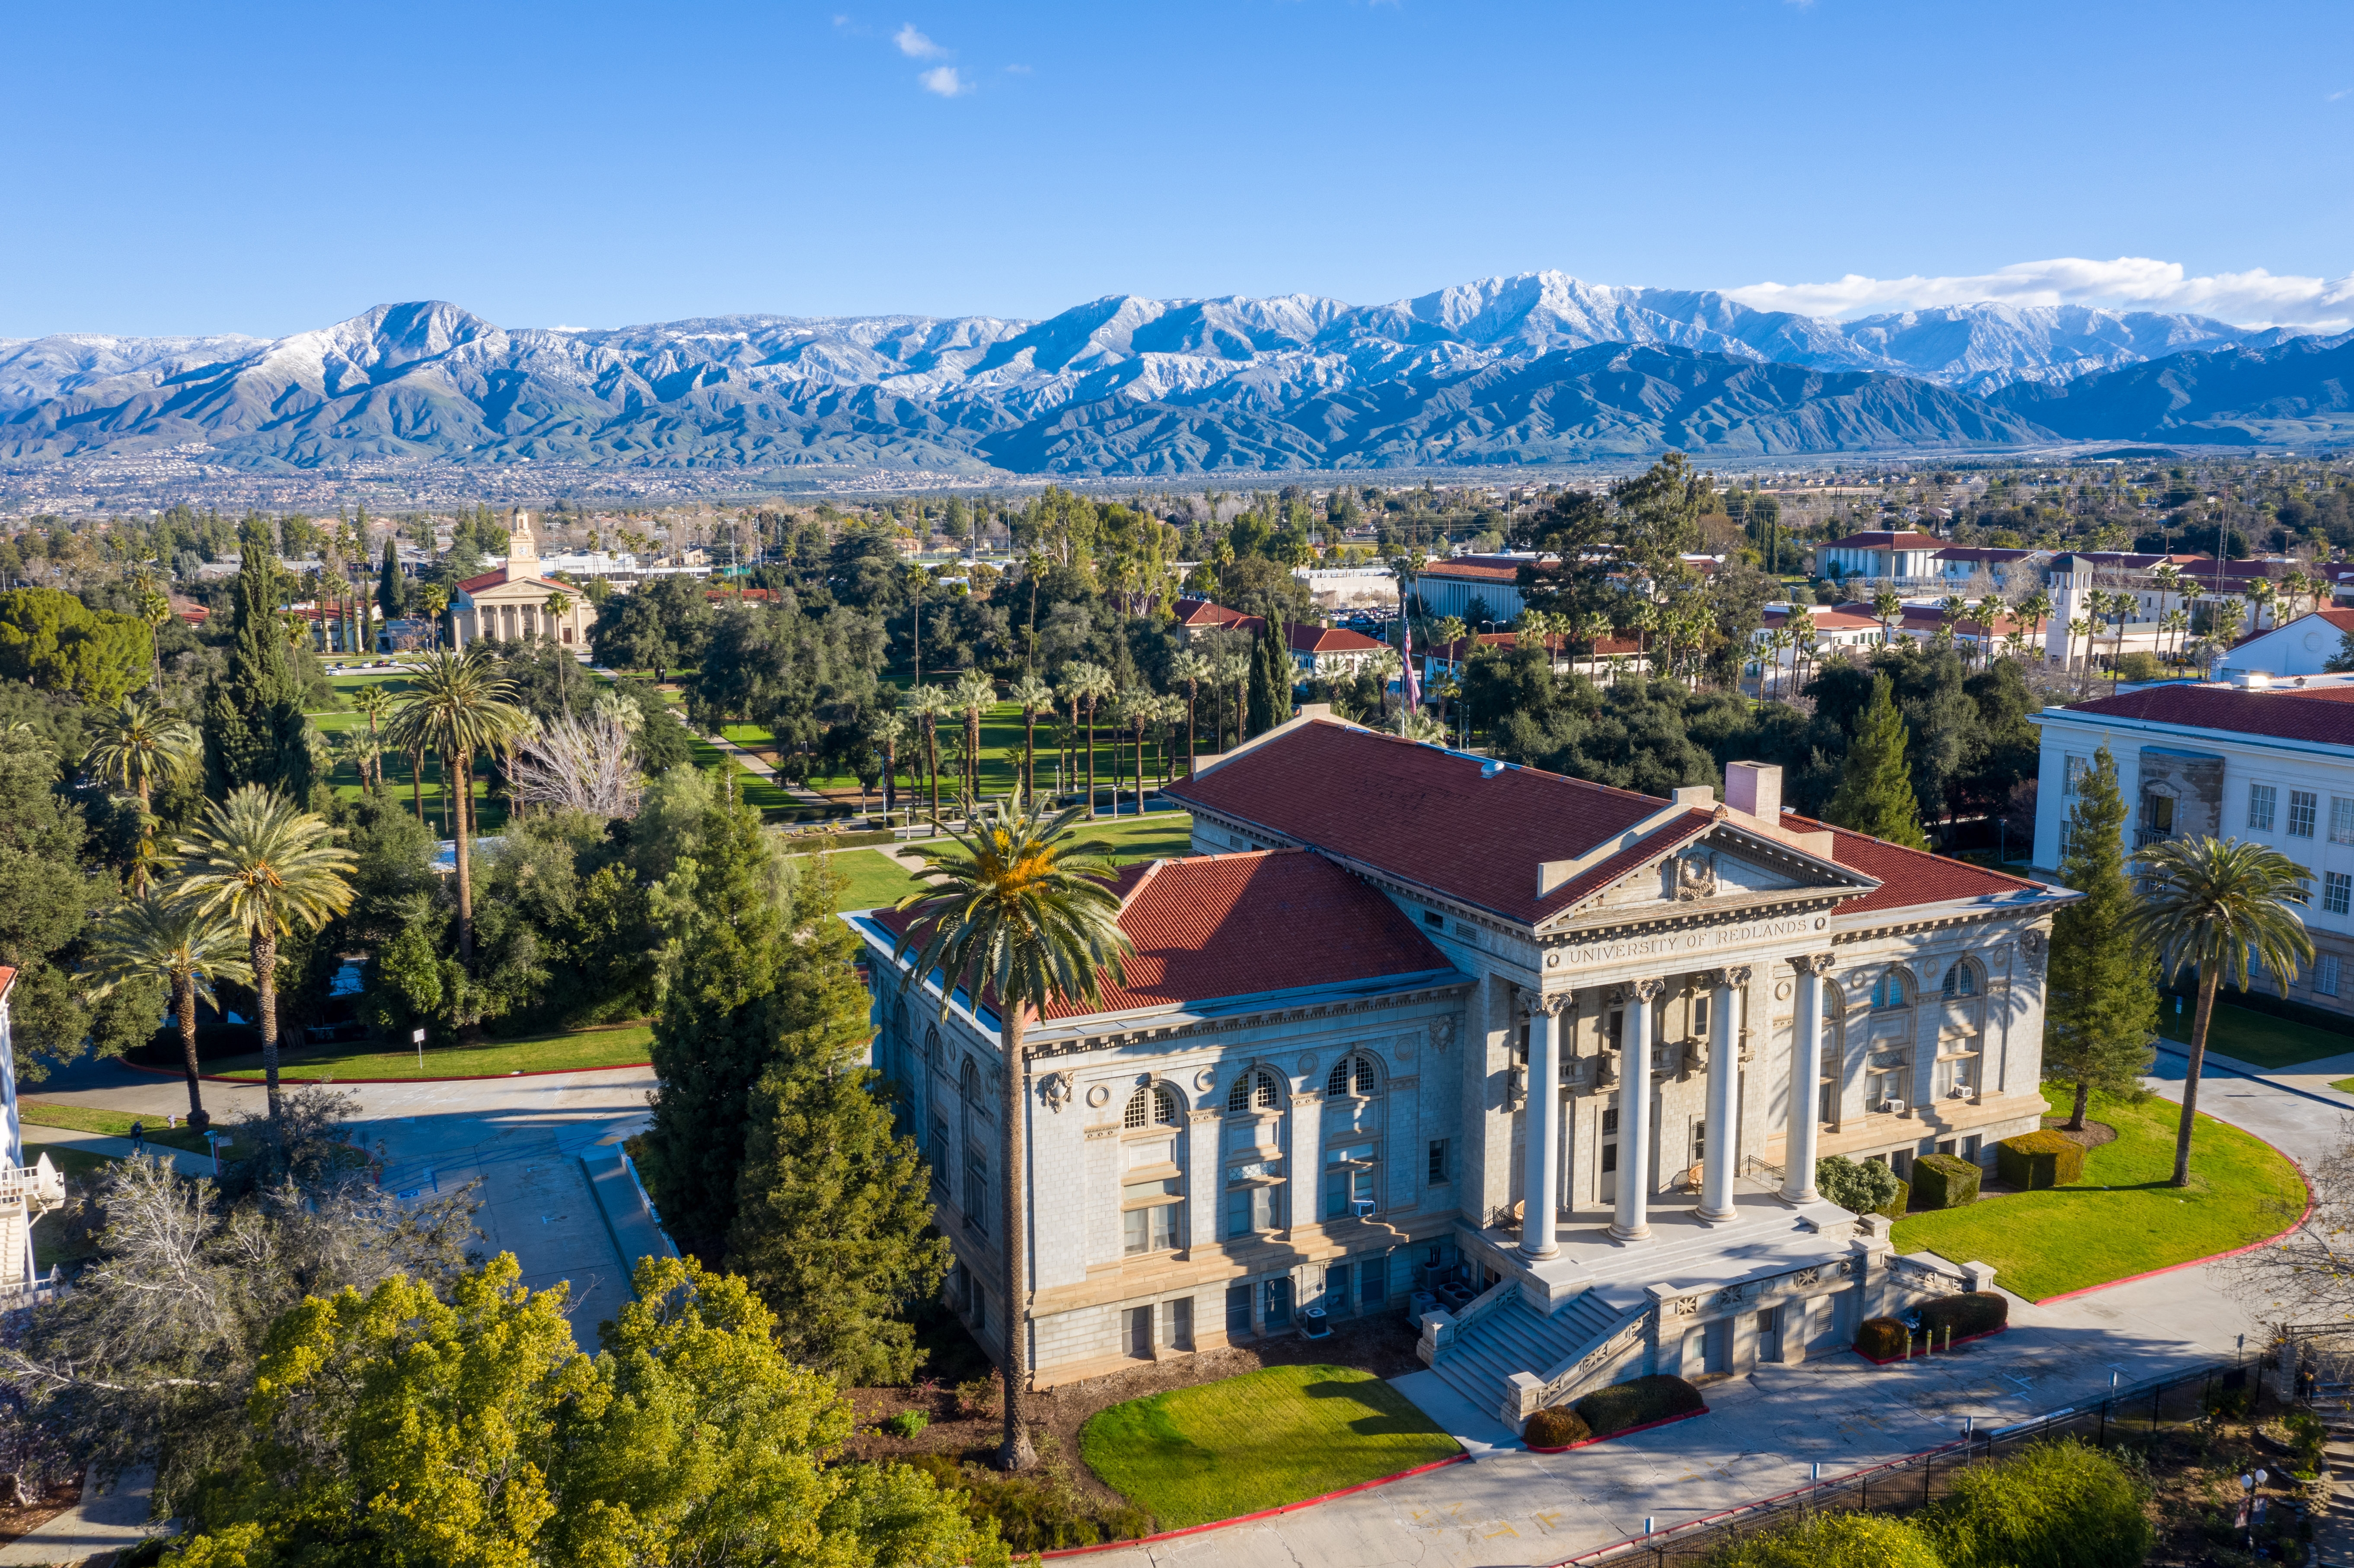 Discover the University of Redlands